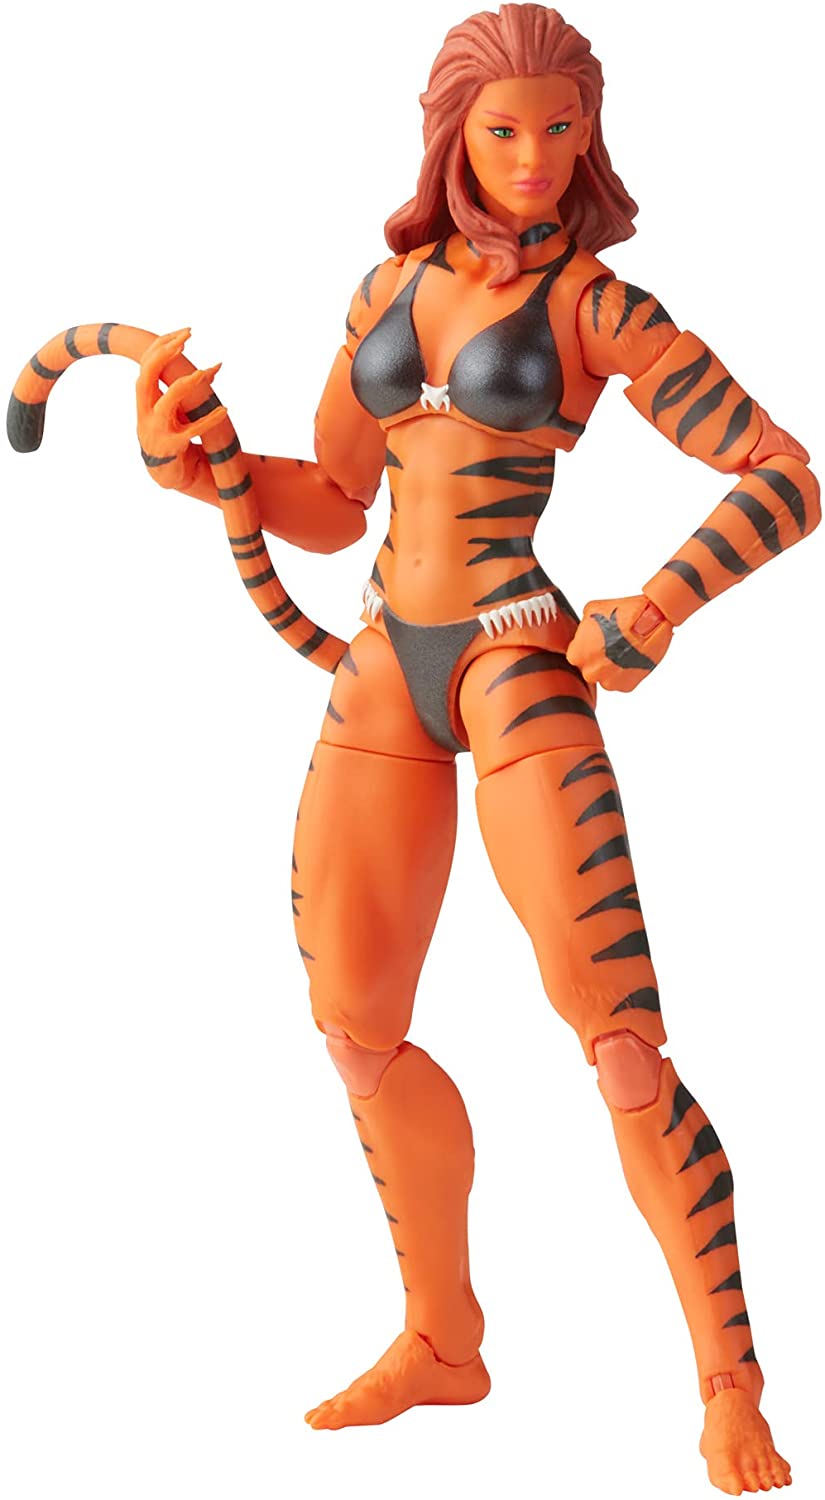 Marvel Legends Series Avengers 6-inch Scale Marvel’s Tigra Figure and 3 Accessories, for Kids Age 4 and Up - Action & Toy Figures Heretoserveyou